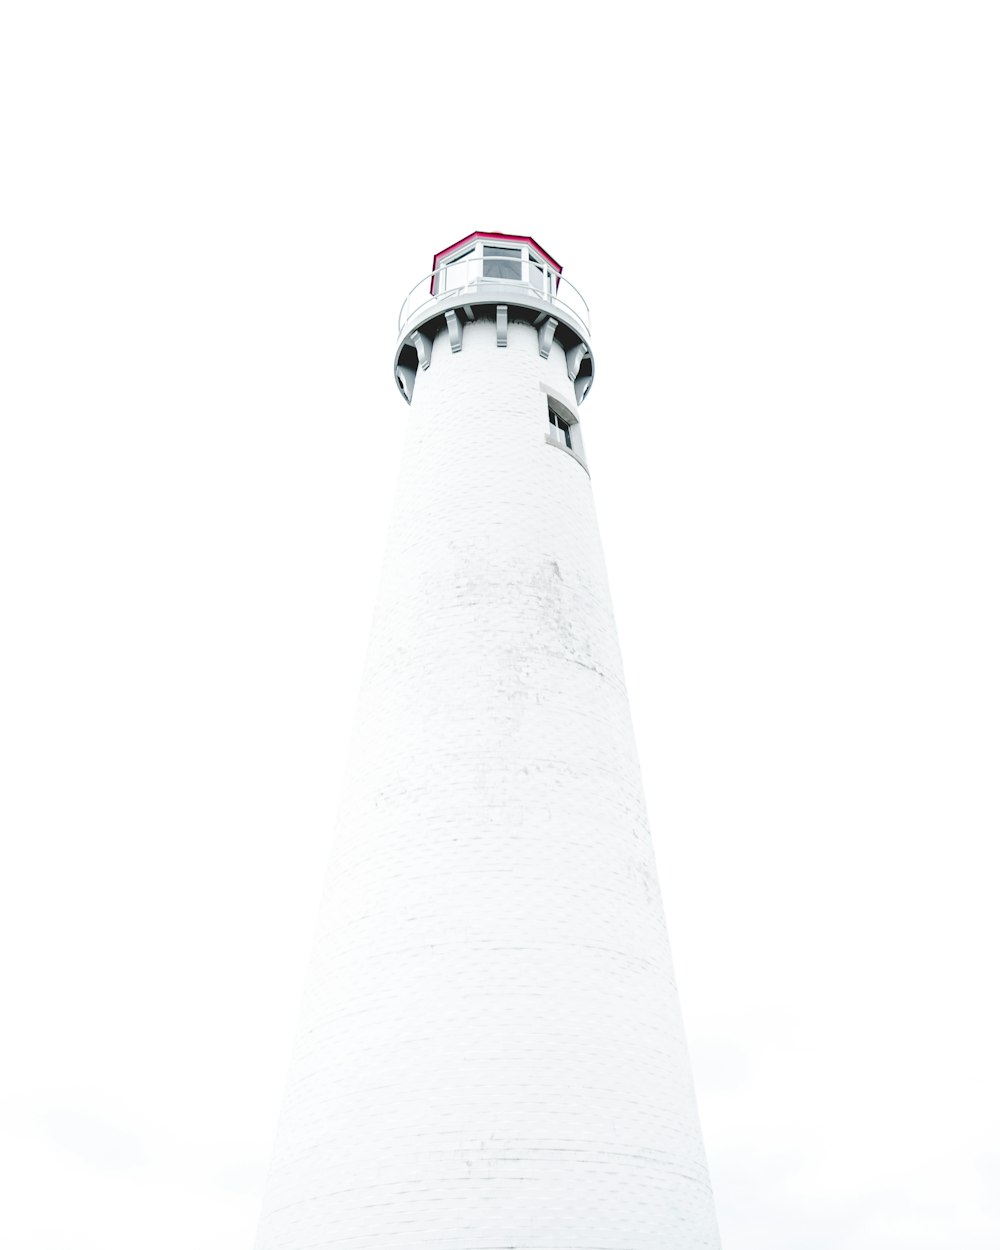 low-angle photography of white light house